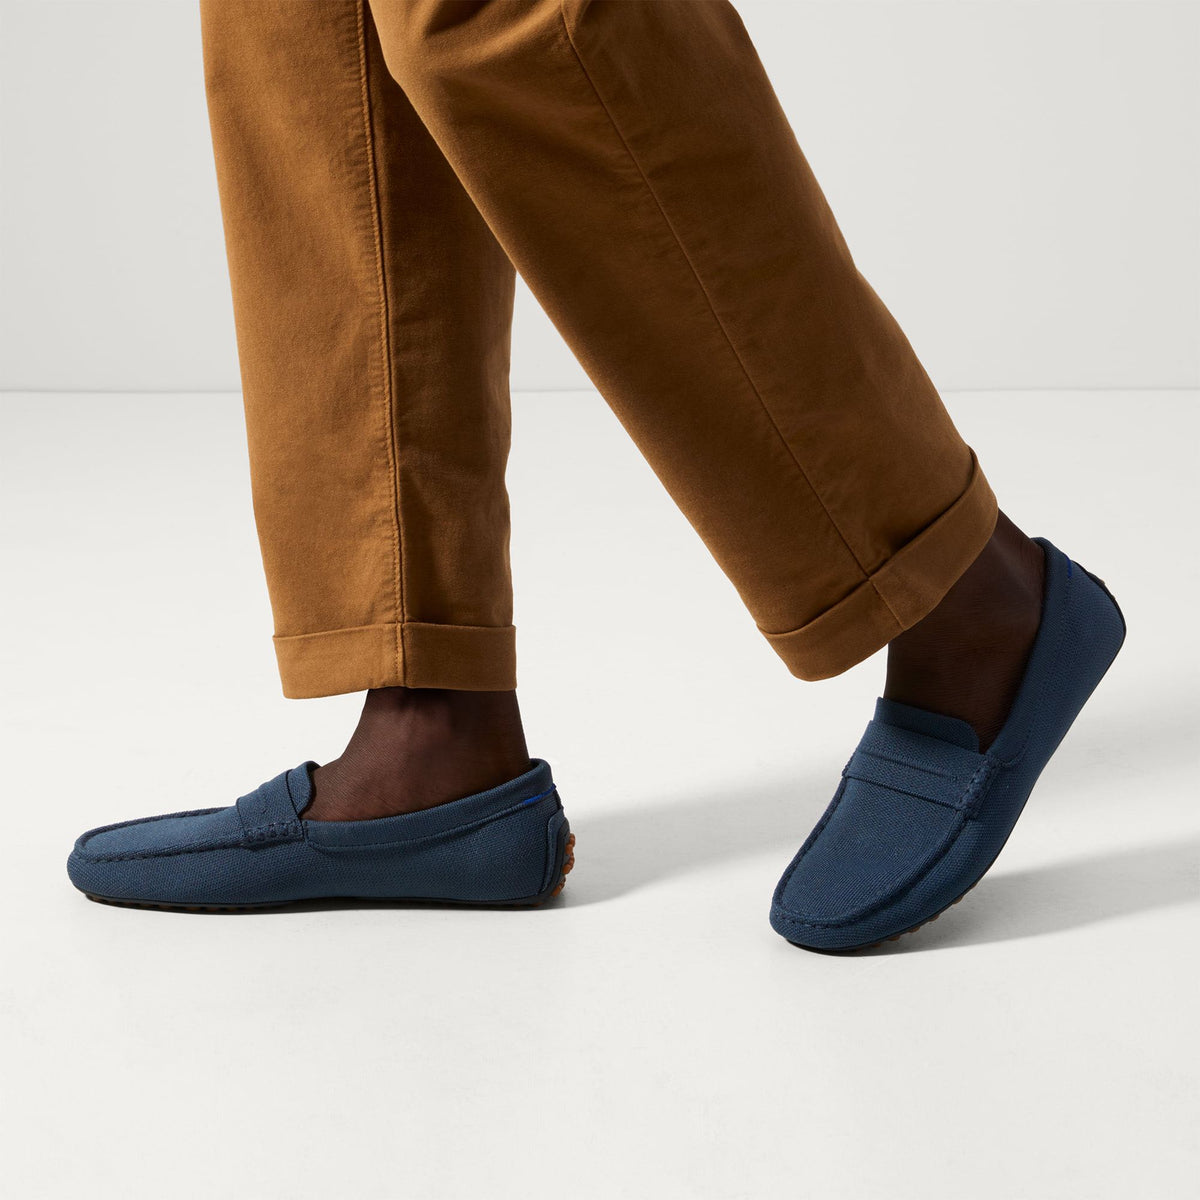 The Driving Loafer in Navy | Men's Slip-on Loafers Rothy's